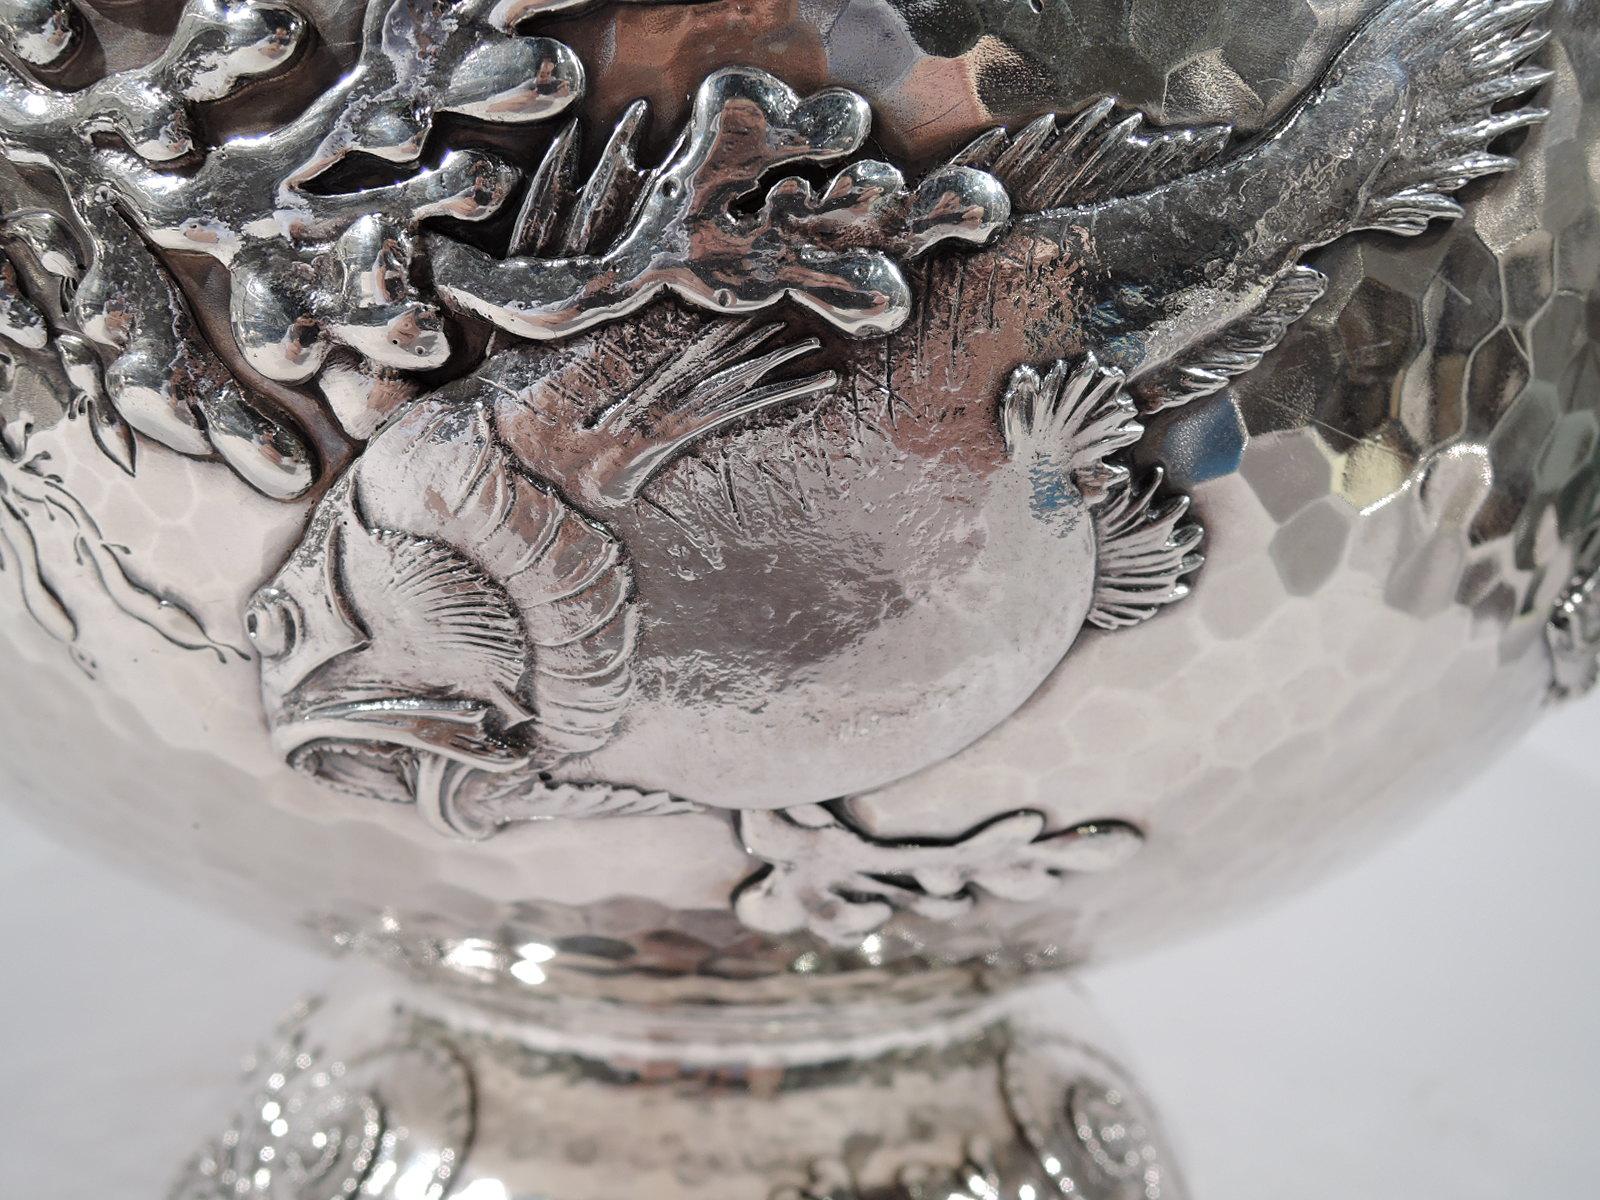 19th Century Tiffany Japonesque Applied Sterling Silver Fishbowl Centerpiece